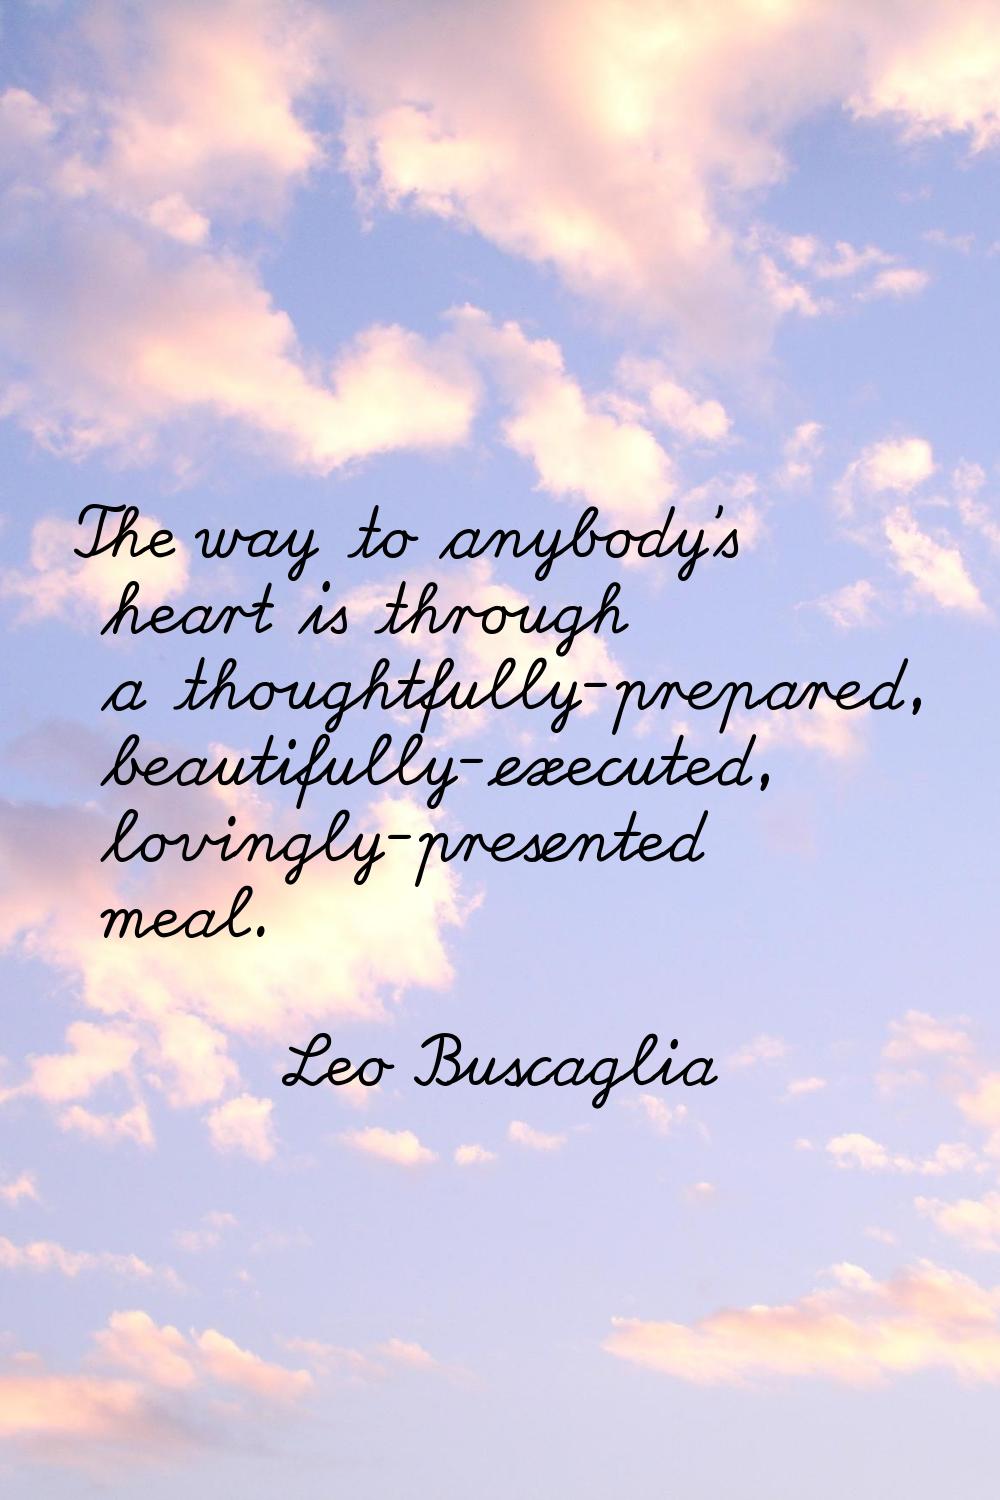 The way to anybody's heart is through a thoughtfully-prepared, beautifully-executed, lovingly-prese